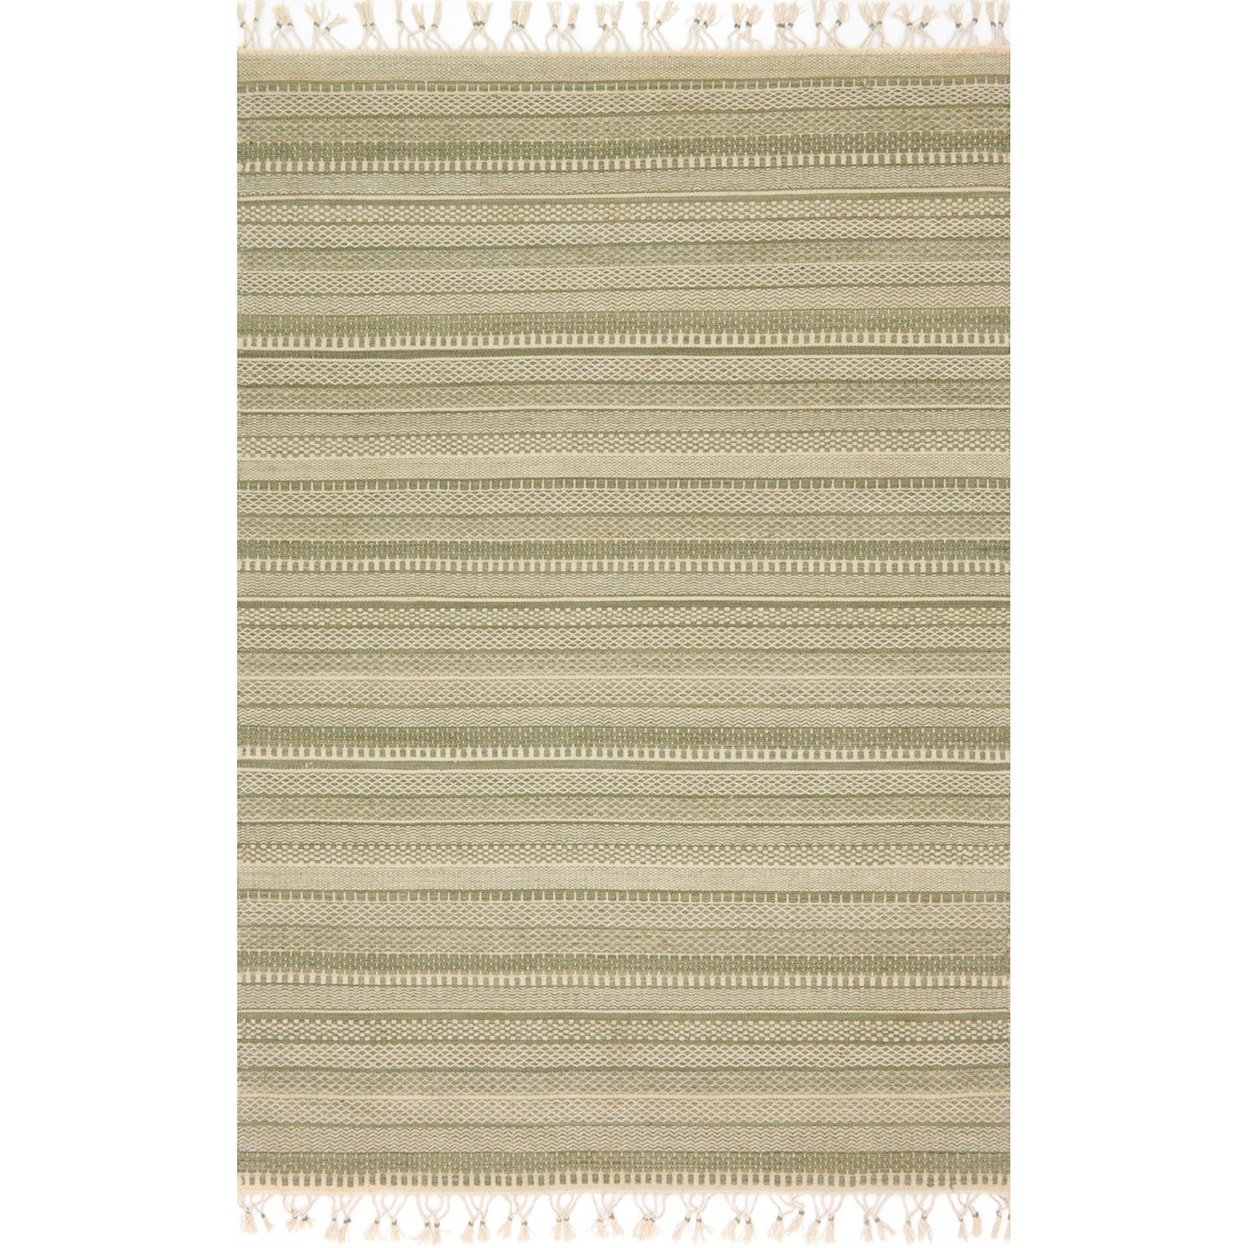 Magnolia Home by Joanna Gaines for Loloi Mikey 7' 9" x 9' 9" Rectangle Rug